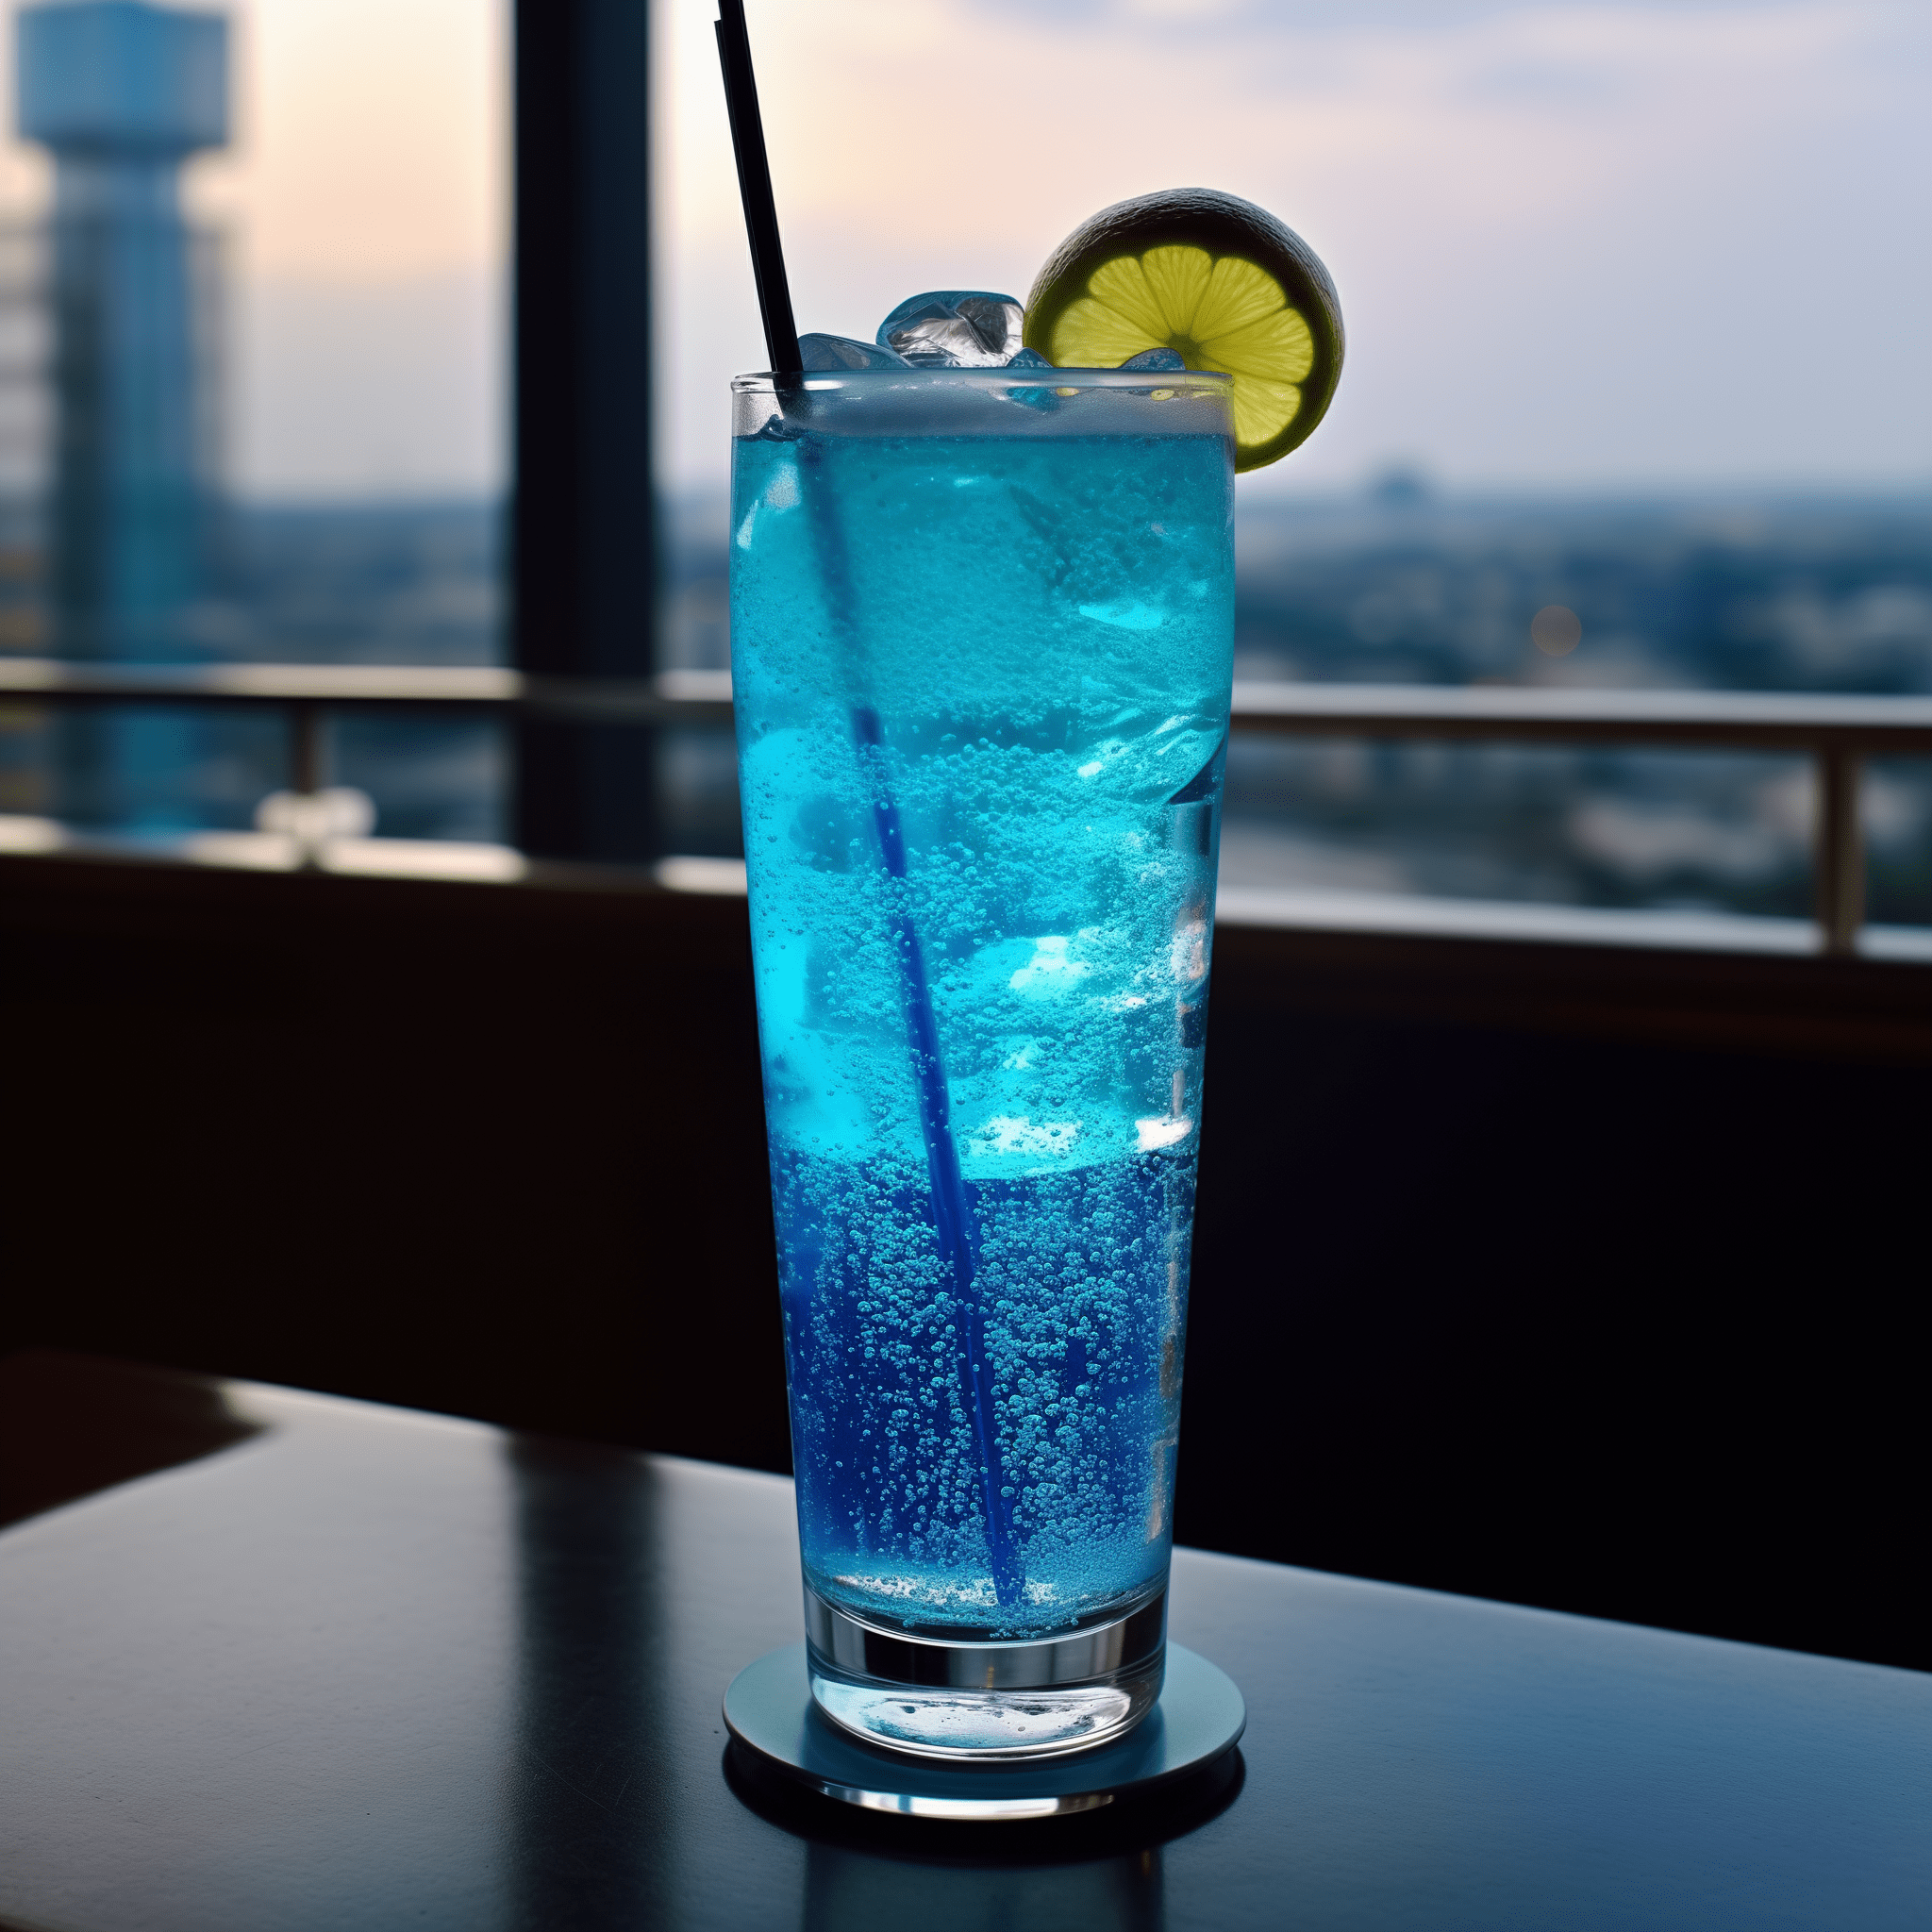 Blue Skyline Cocktail Recipe - The Blue Skyline is a tantalizing mix of sweet and tart flavors with a fruity raspberry undertone. It's a light and refreshing cocktail with a playful balance between the citrus and the sweet berry notes.